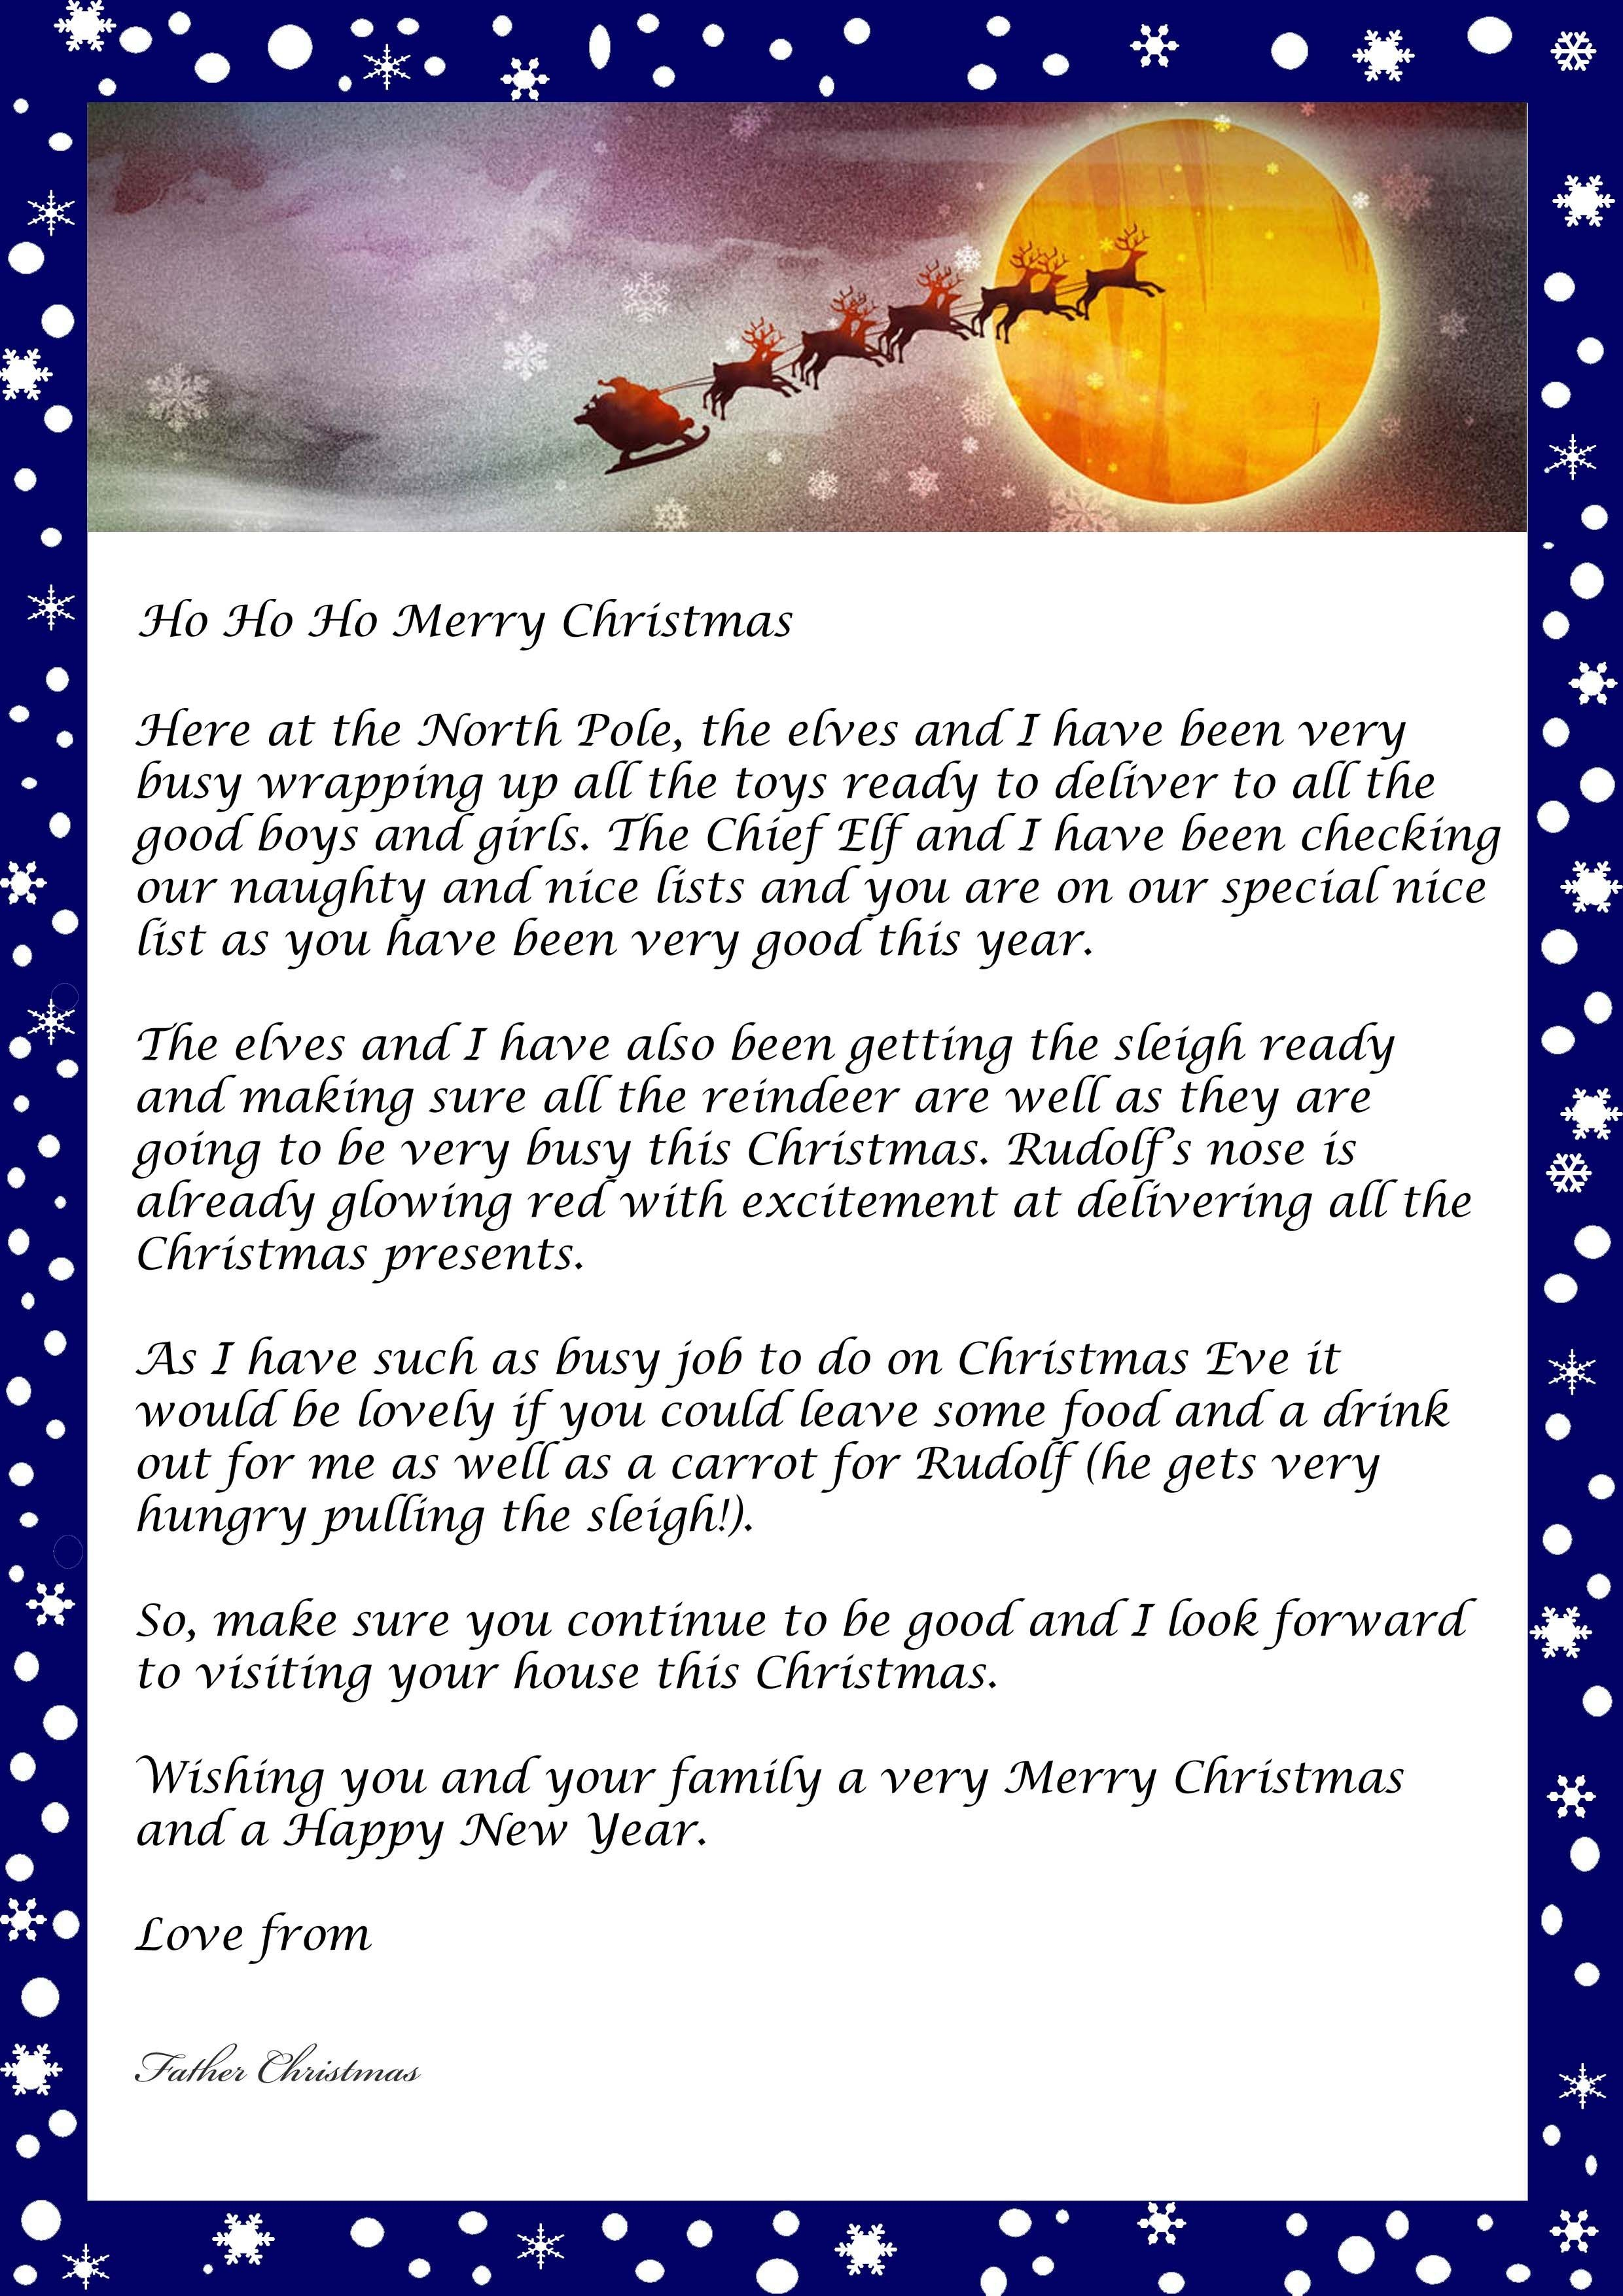 Letters From Father Christmas Free Letter Santa New Personalized - Free Personalized Printable Letters From Santa Claus